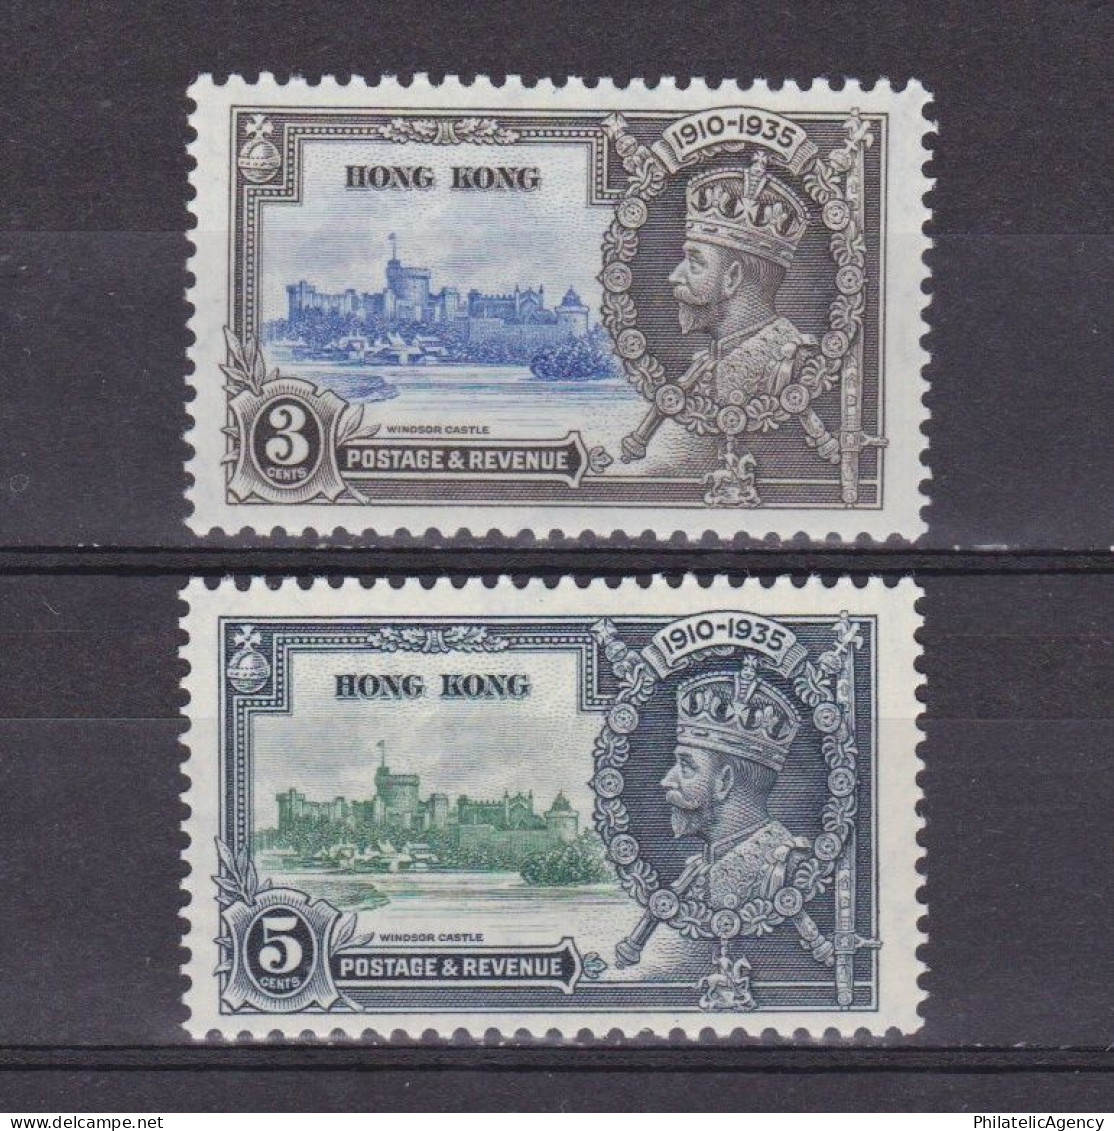 HONG KONG 1935, SG# 133-134, Silver Jubilee, Part Set, KGV, MNH - Unused Stamps